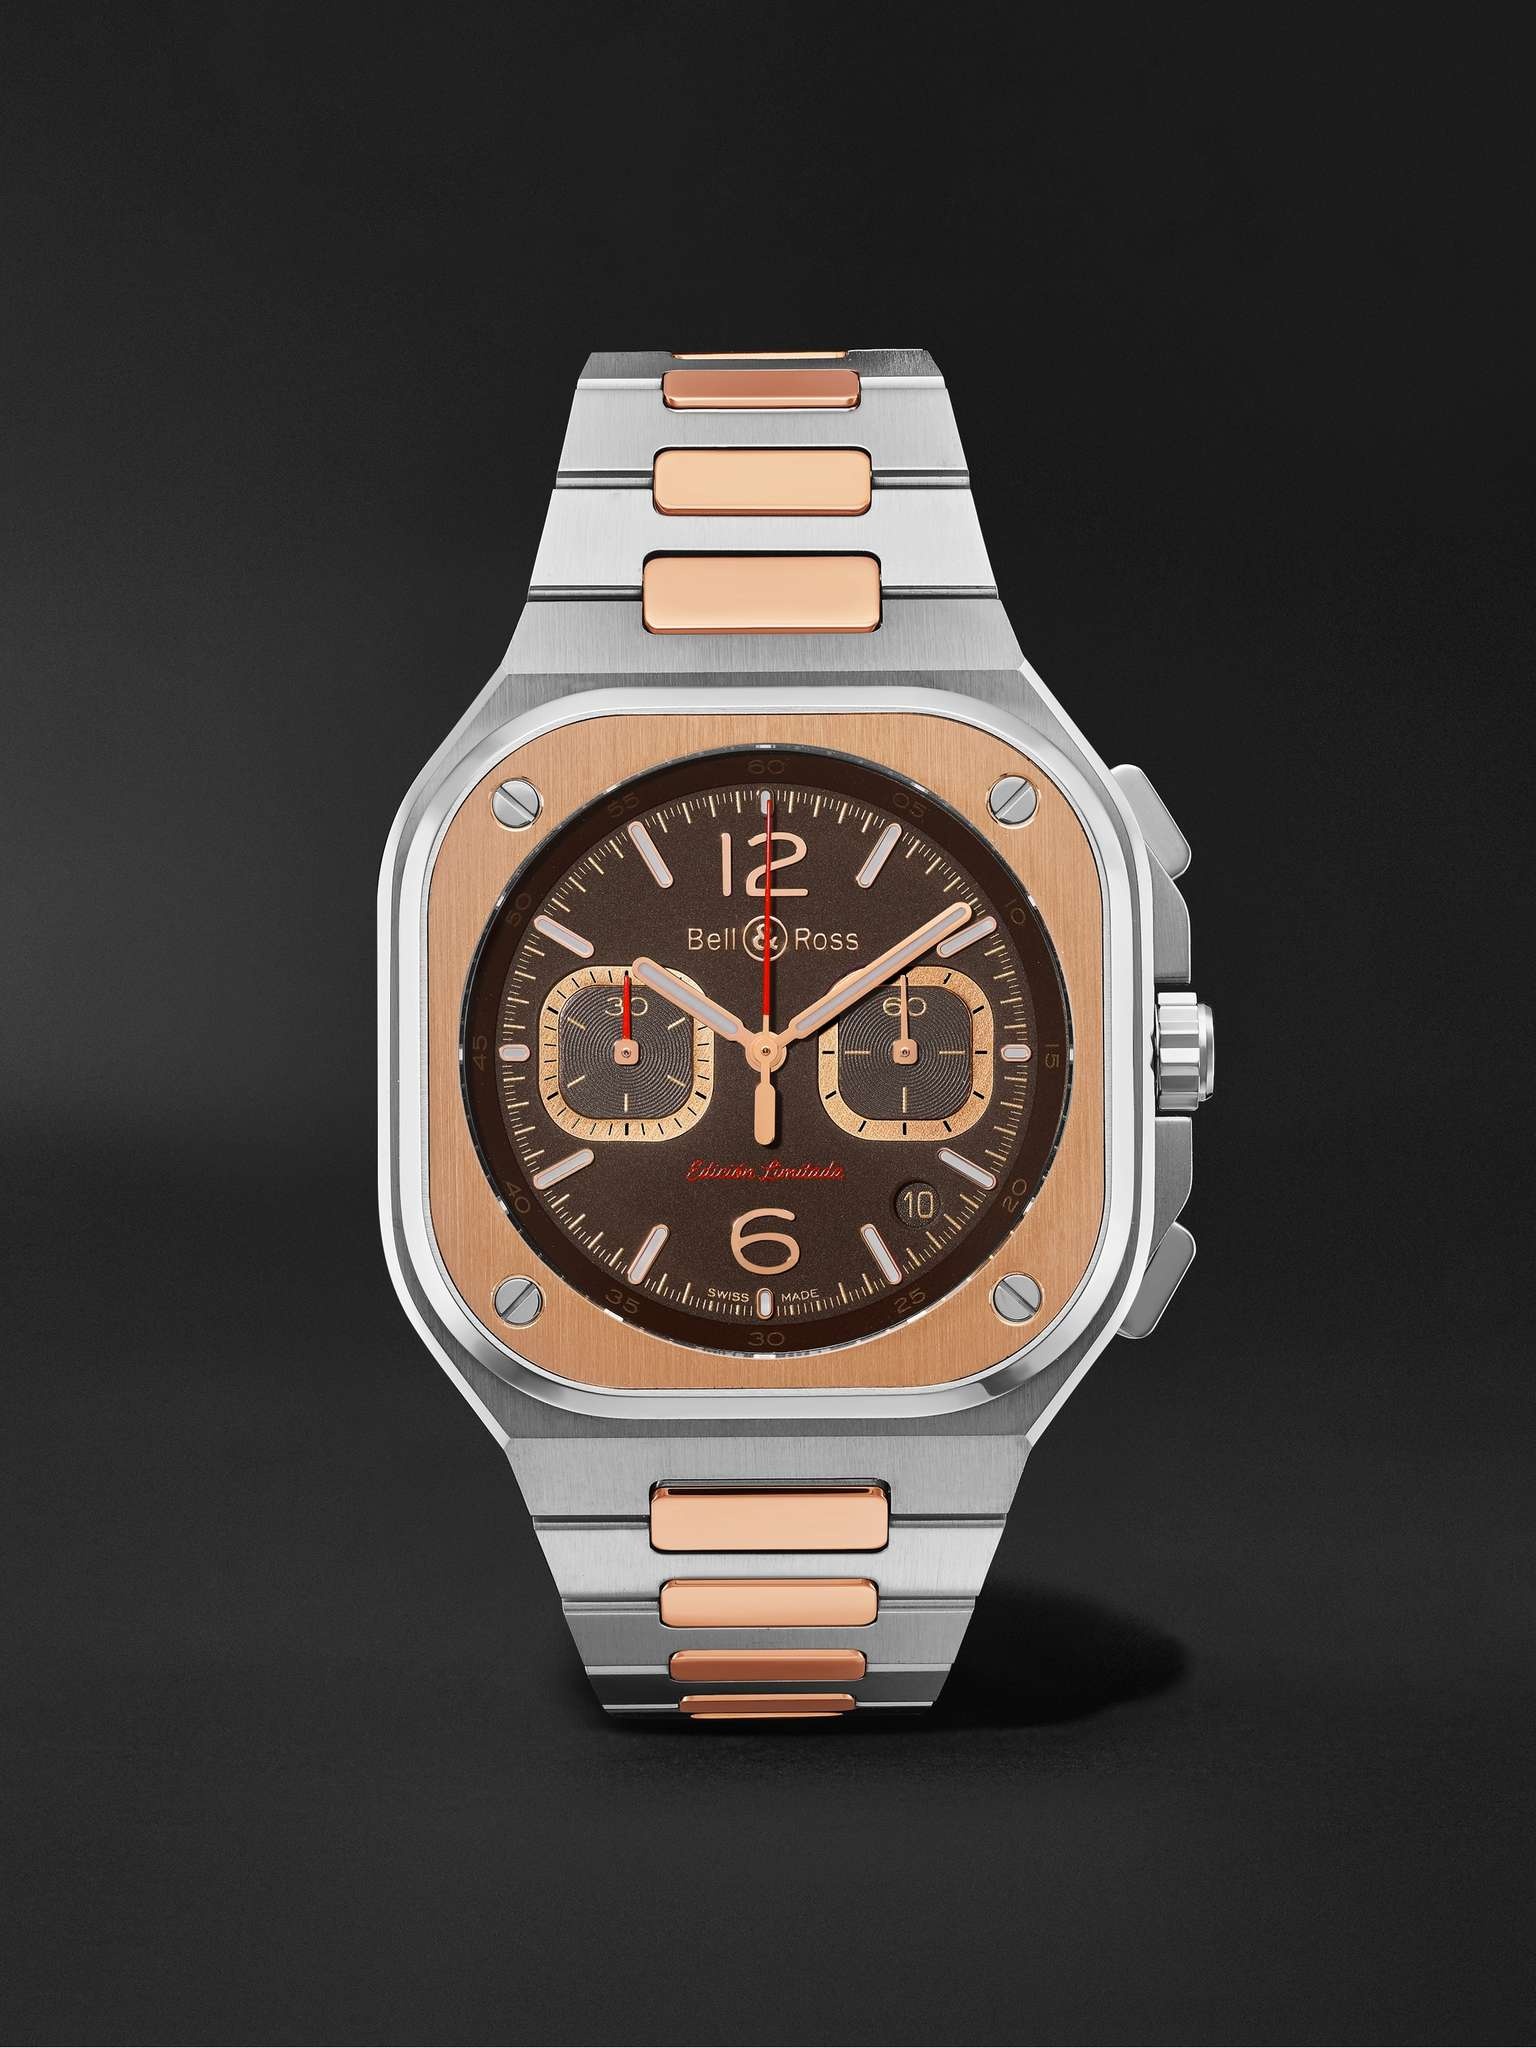 BR 05 Limited Edition Automatic Chronograph 42mm Stainless Steel and Rose Gold Watch, Ref. No. BR05C - 2